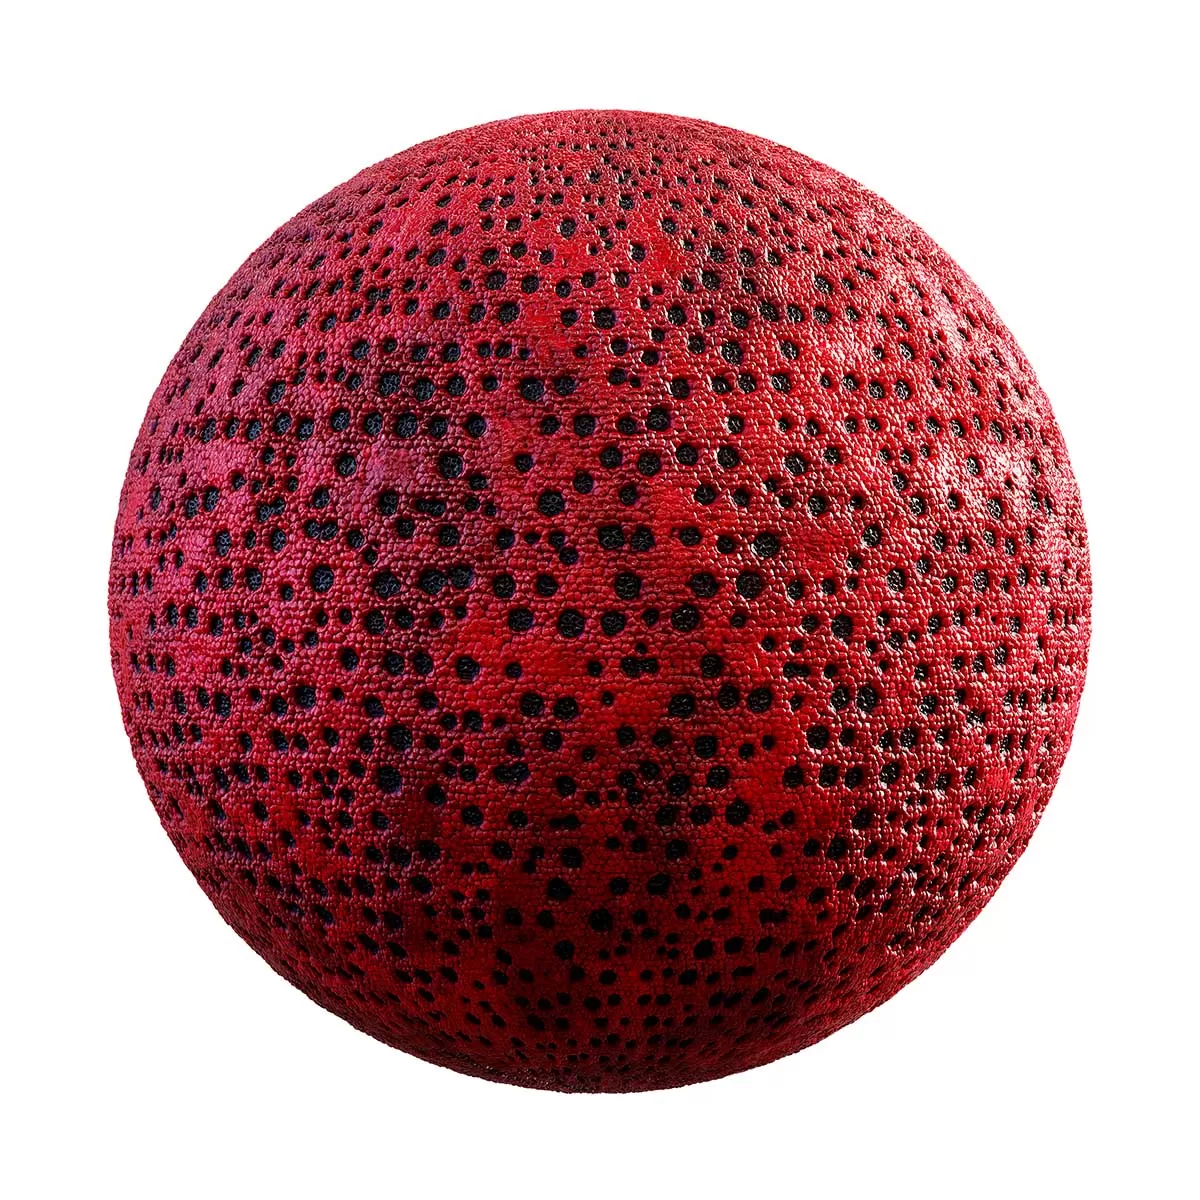 CGAxis PBR 31 – Red Creature Skin 32 83